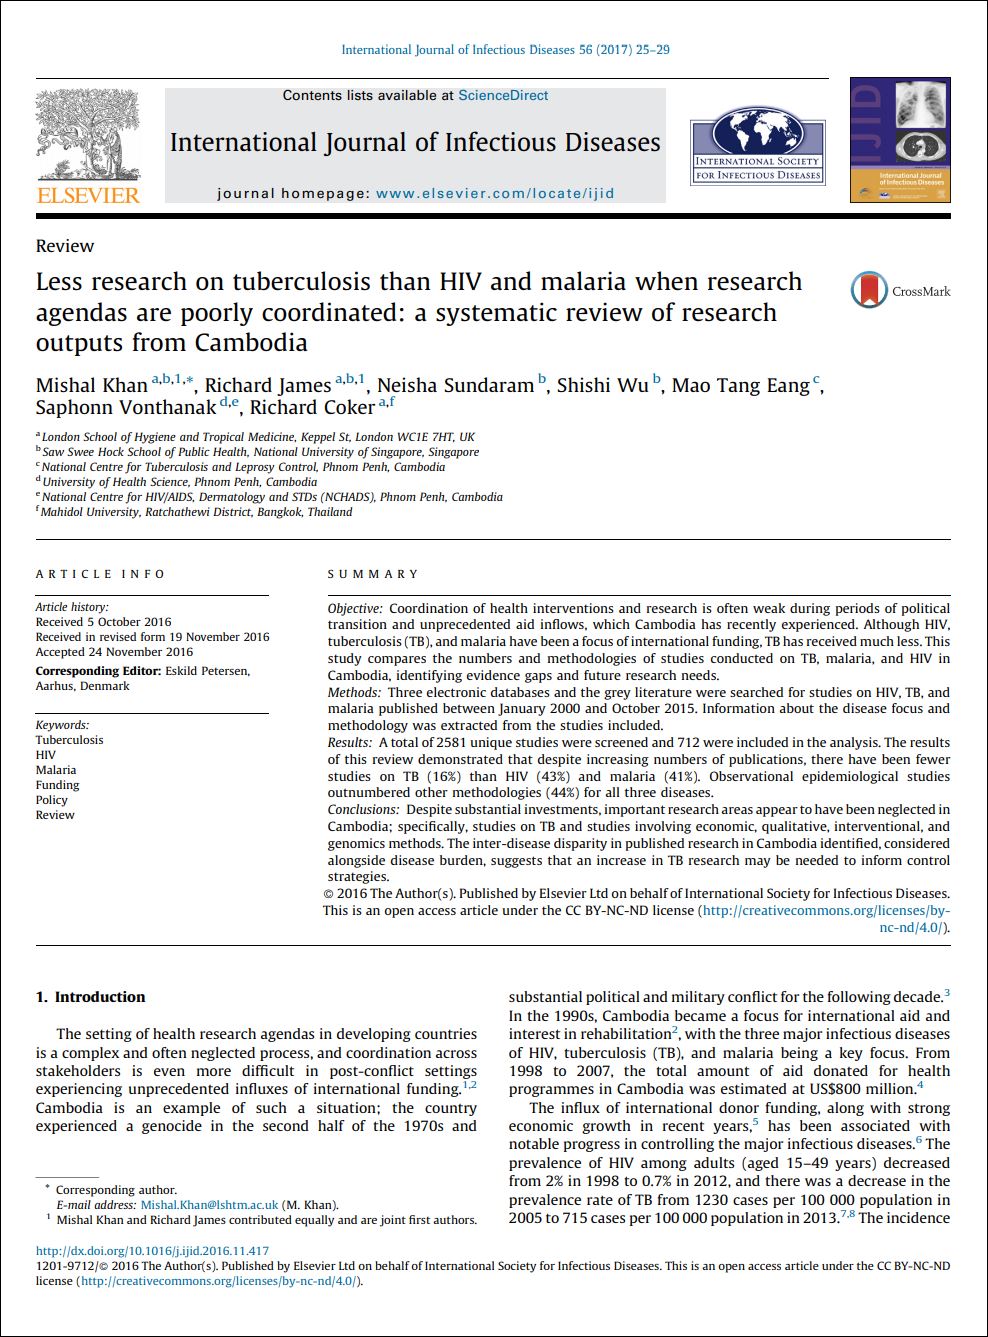 Less research on tuberculosis than HIV and malaria when research agendas are poorly coordinated: a systematic review of research outputs from Cambodia